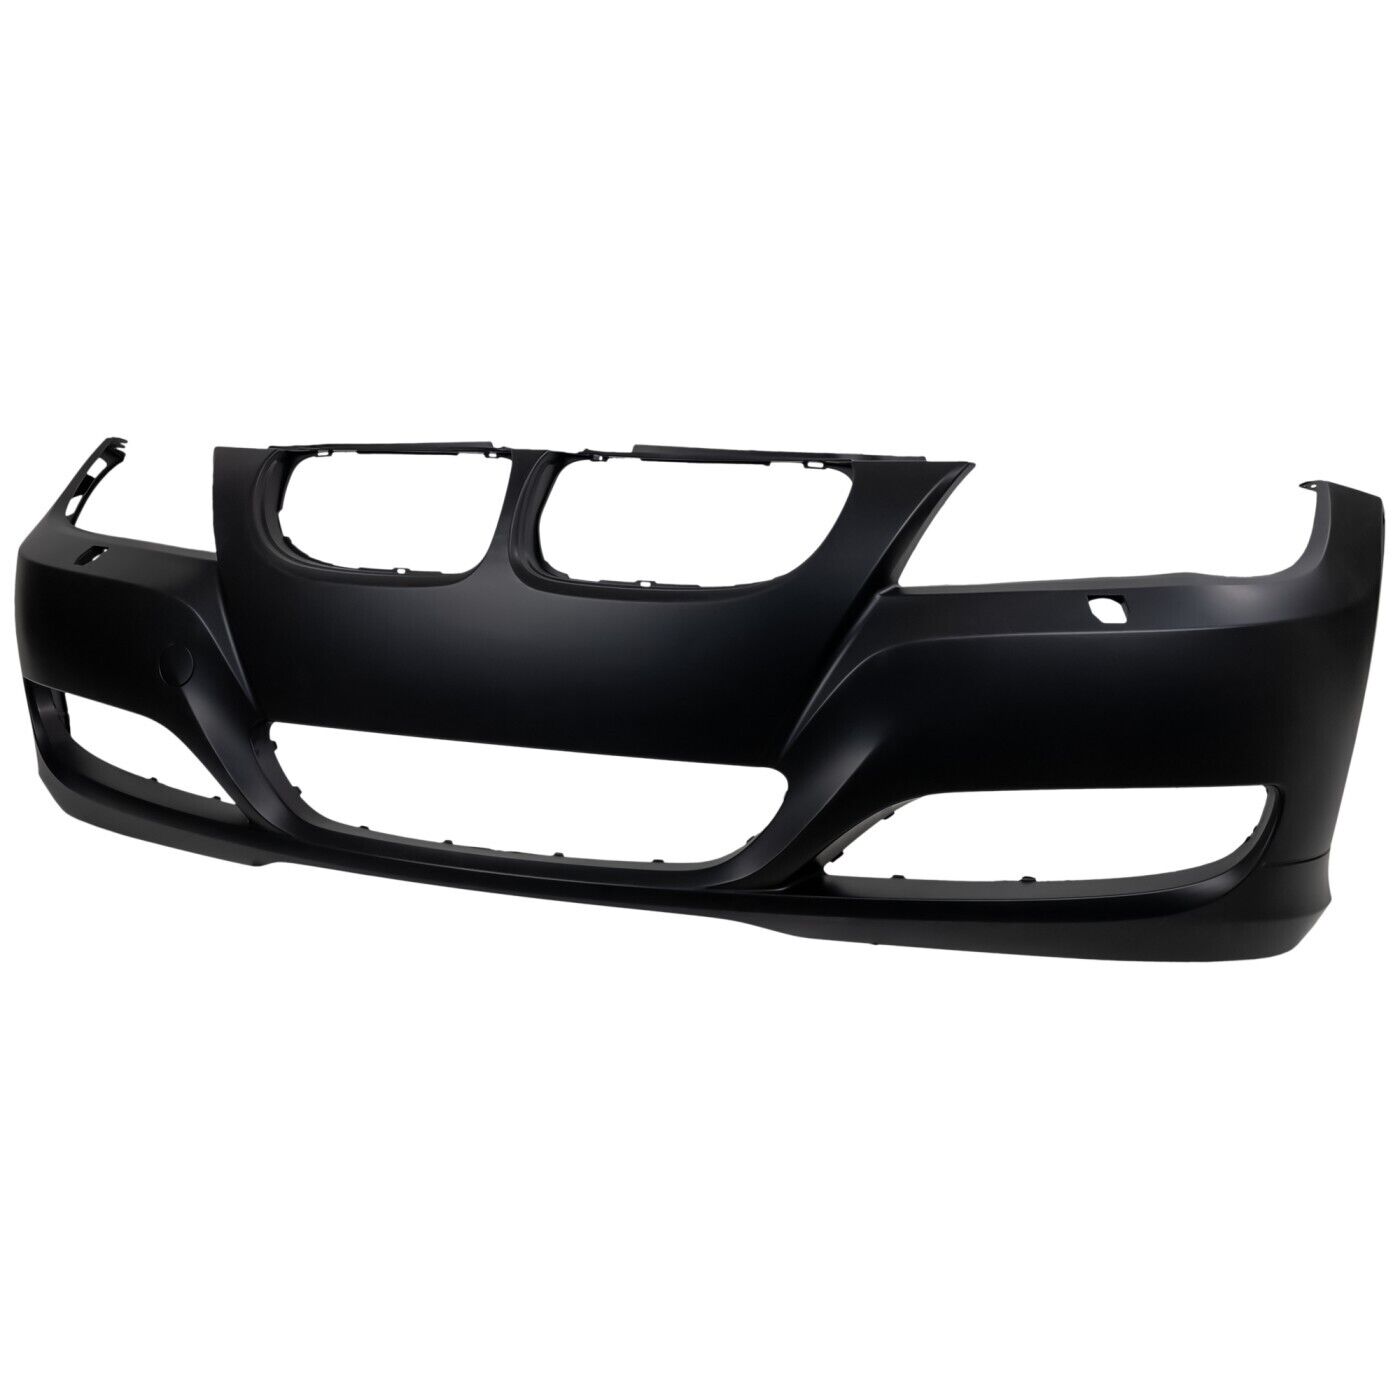 Front Bumper Cover For 2009-12 BMW 3-Series Sedan Wagon Primed 51117226711